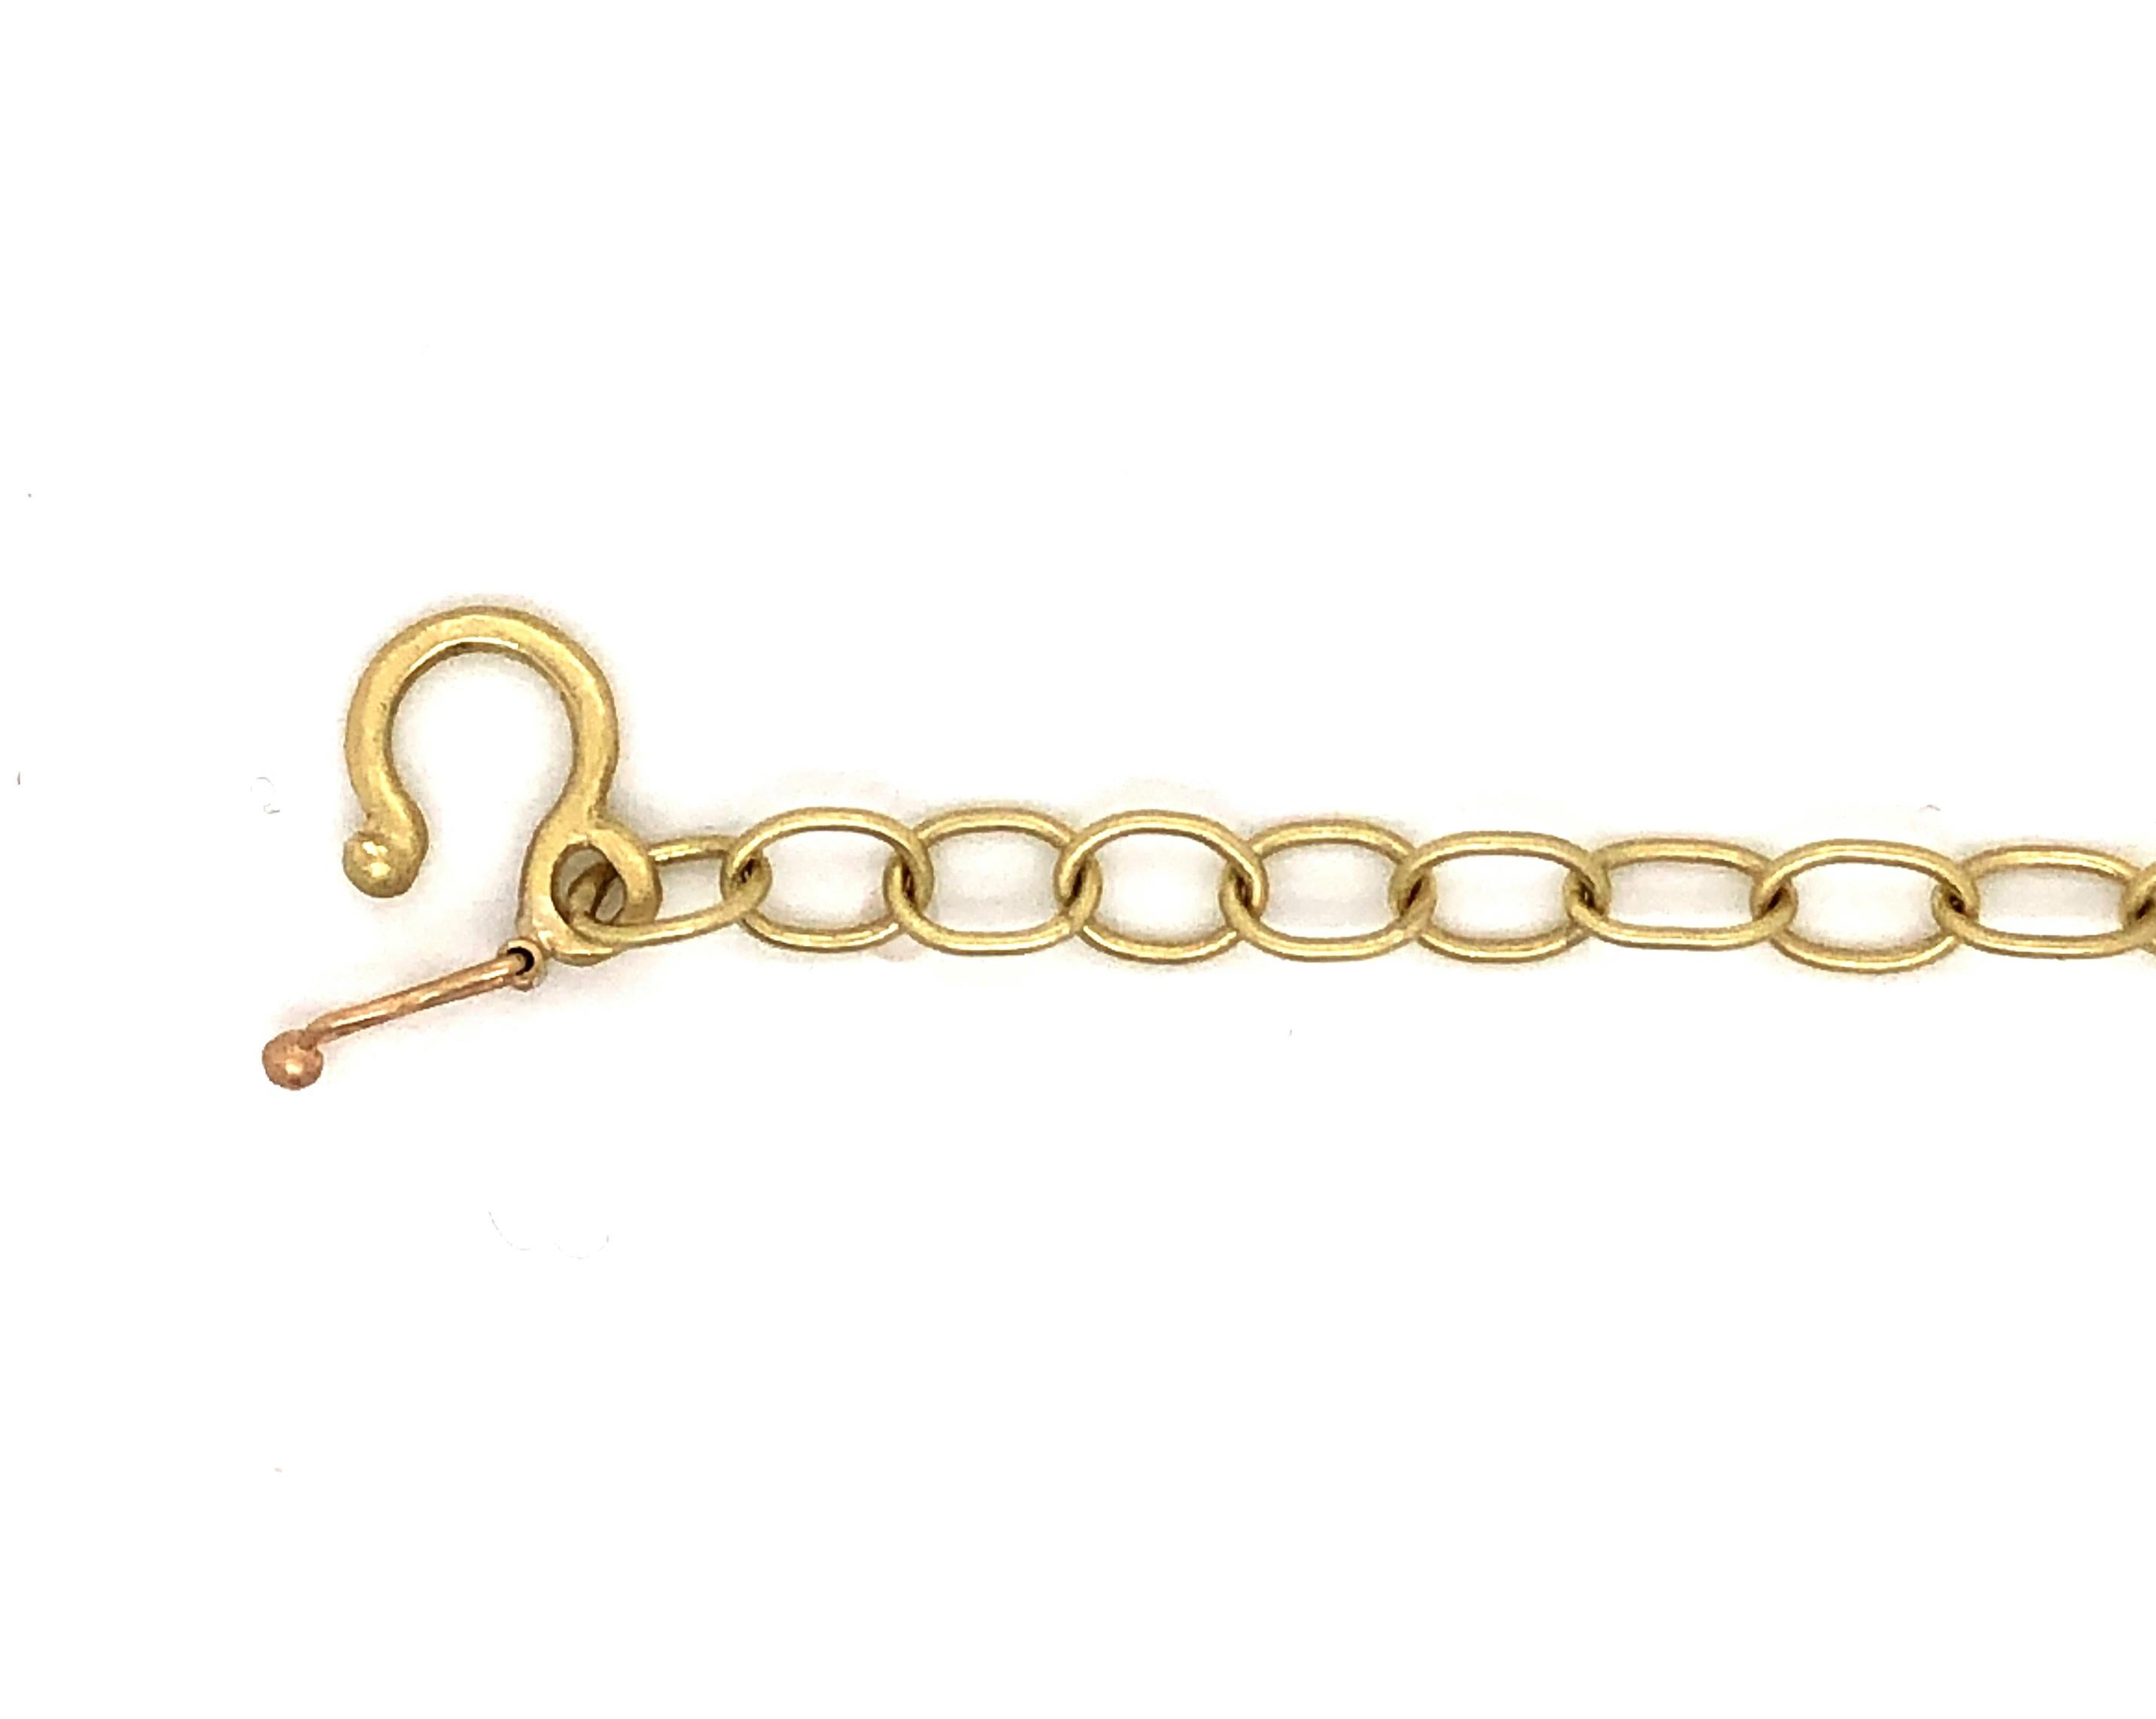 Faye Kim 18 Karat Gold Oval Link Chain

Classic and versatile, Faye's 18k gold handmade oval link chain is a must in every jewelry wardrobe. It elevates the traditional cable link chain to a new level. Great to wear alone or as a layering piece with